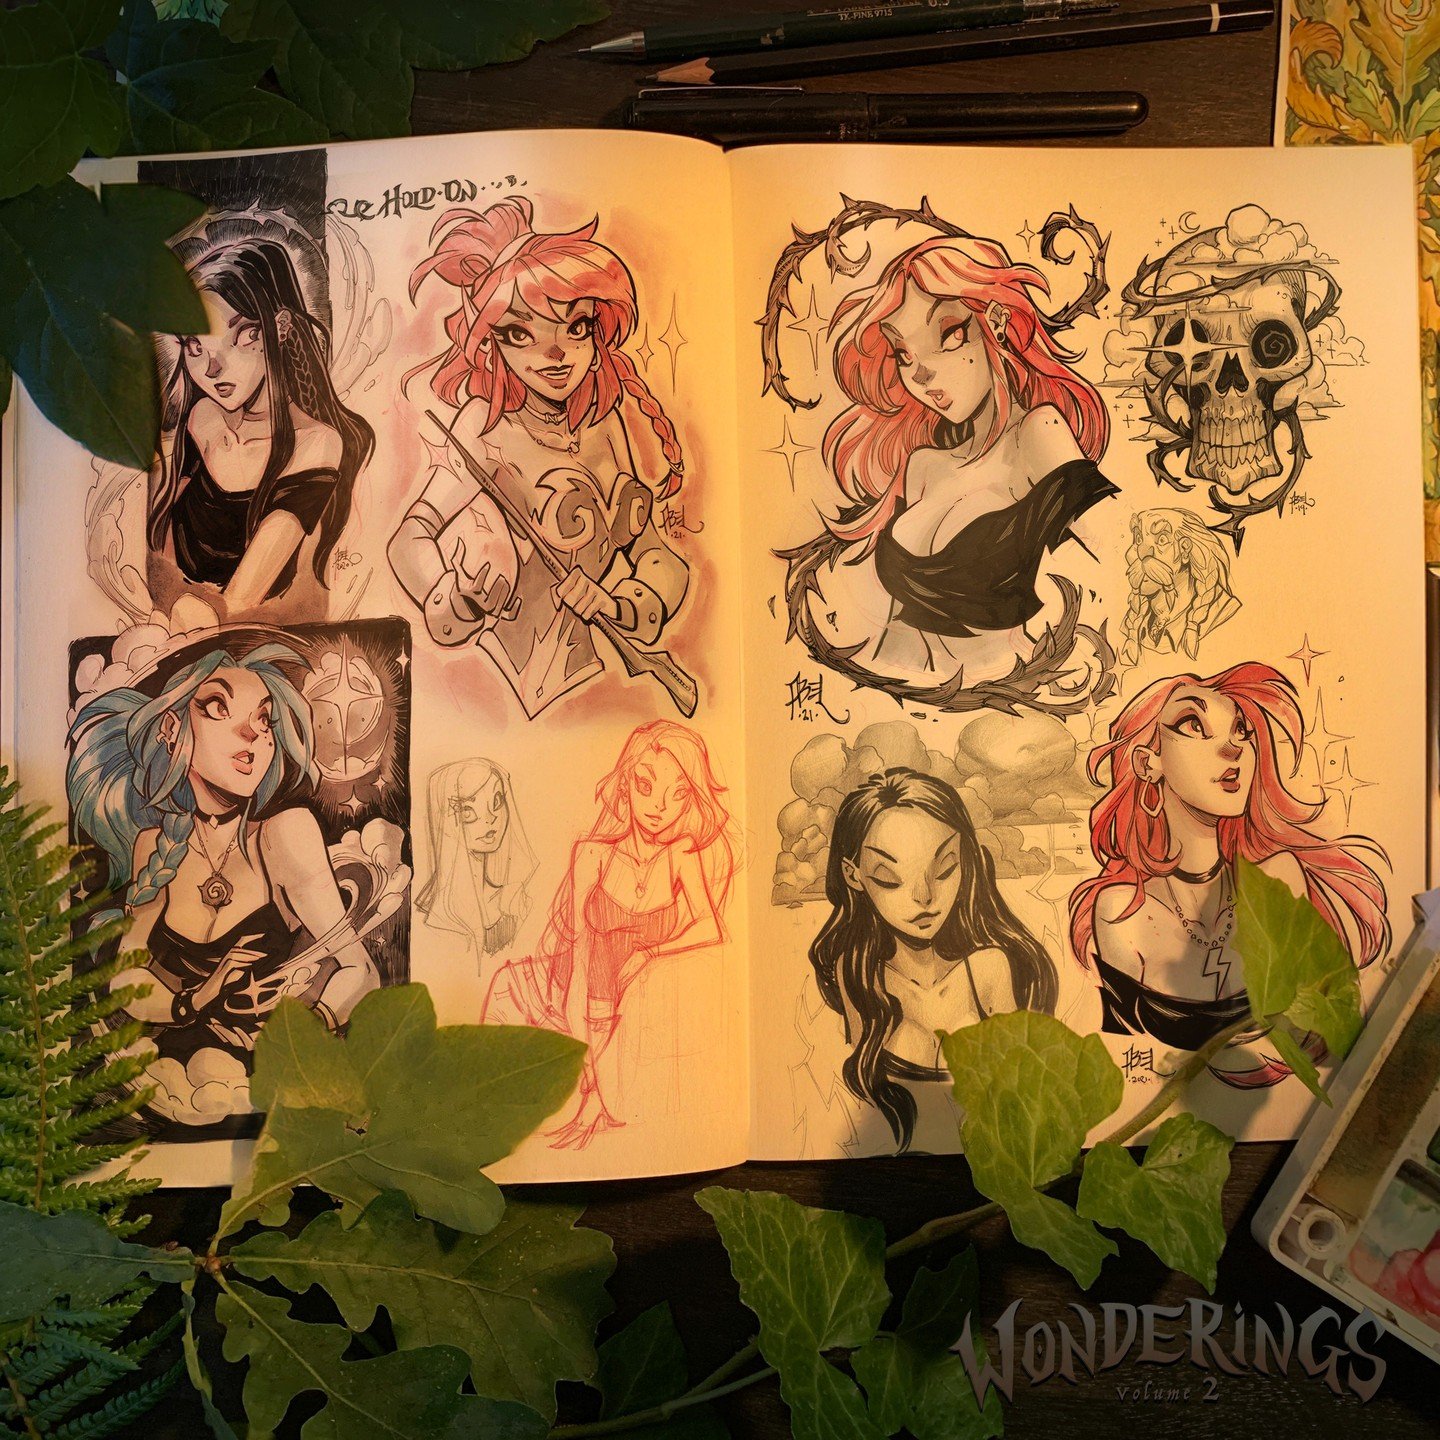 🌟✨💫⏳ Less than 24 hours left on my Kickstarter for my new artbook &quot;Wonderings Volume 2&quot;! Don't miss your last chance to get all the bonus goodies, exclusive prints, bookmarks, and a FREE original sketch with every order. Let's go out with